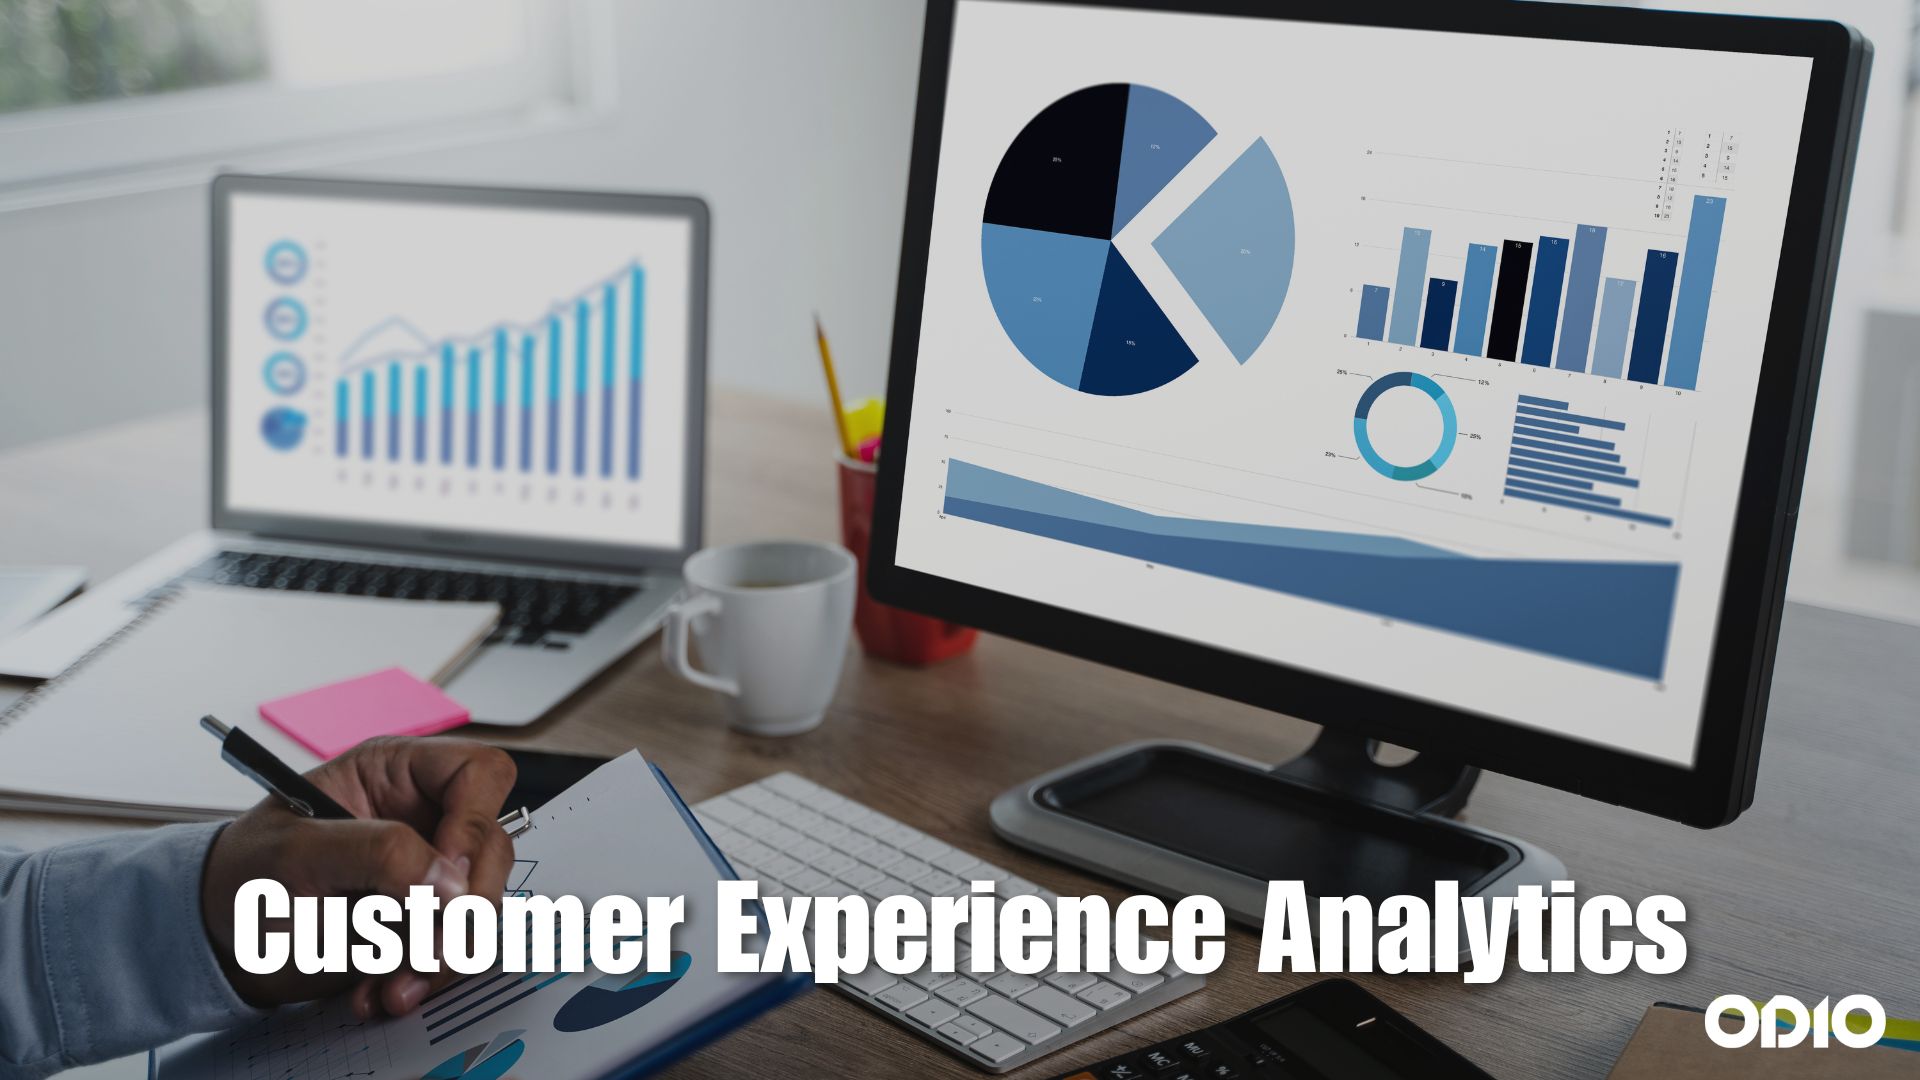 Image showing Customer Experience Analytics via graphs and pie charts